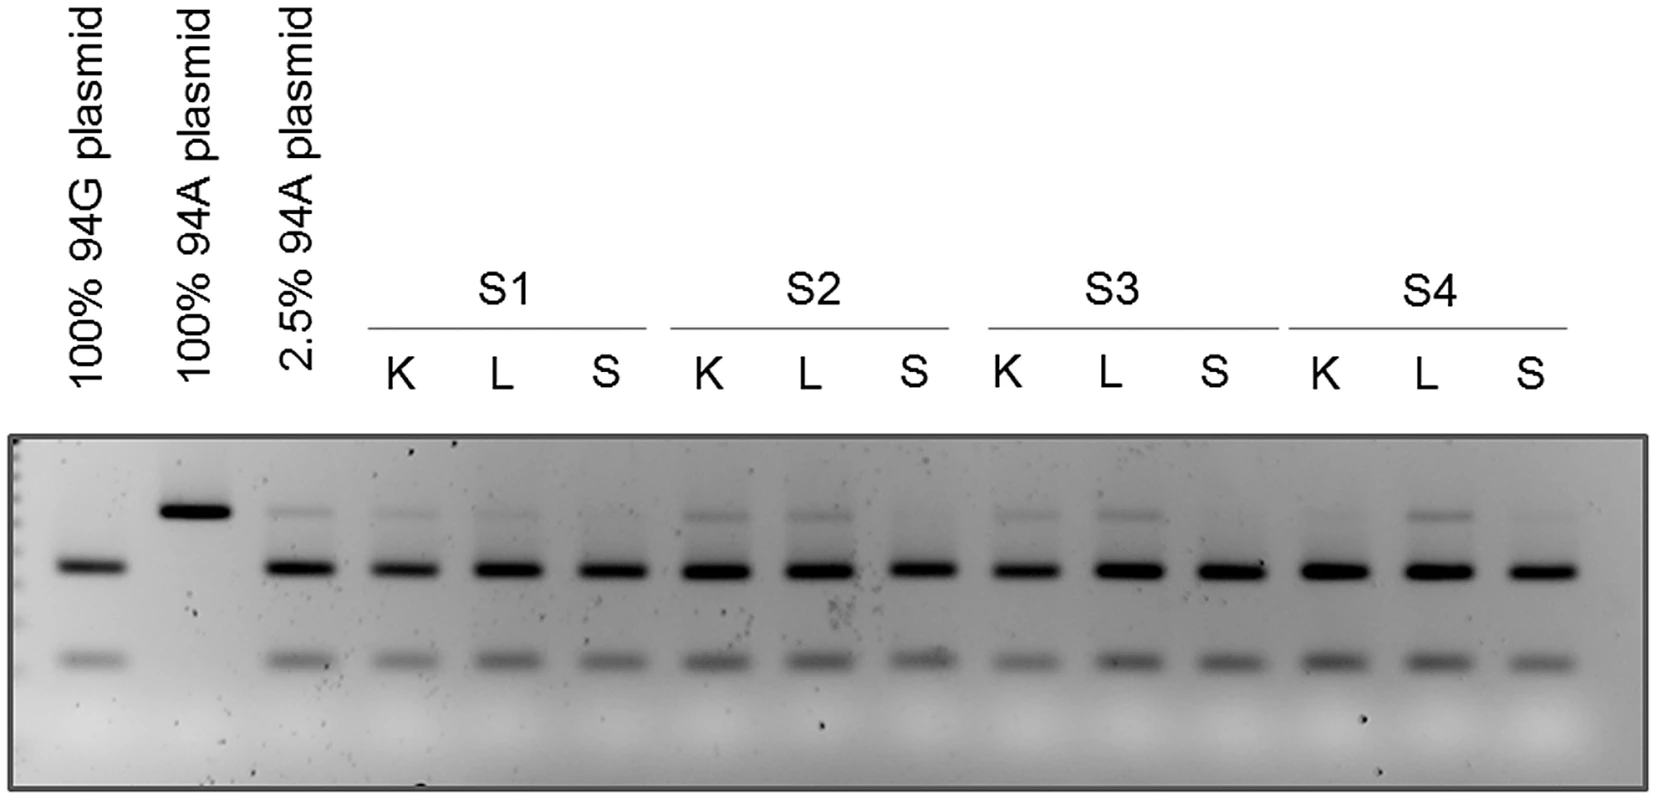 Mutation at position 94 is verified by RFLP analysis.